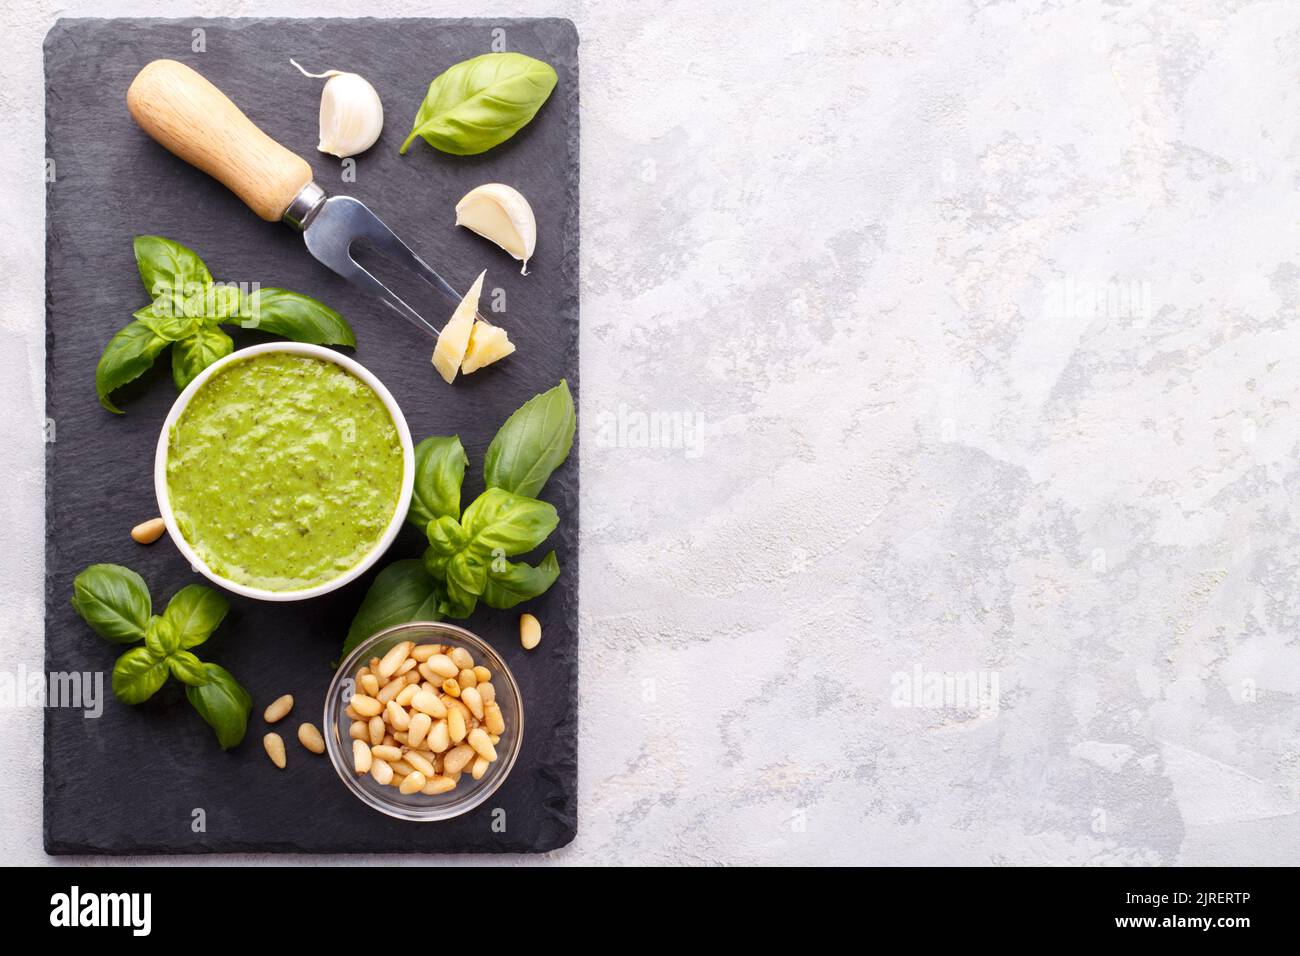 Pesto sauce and ingredients, cheese, basil, garlic, pine nuts, olive oil on black cheese board and grey stone background with copy space Stock Photo